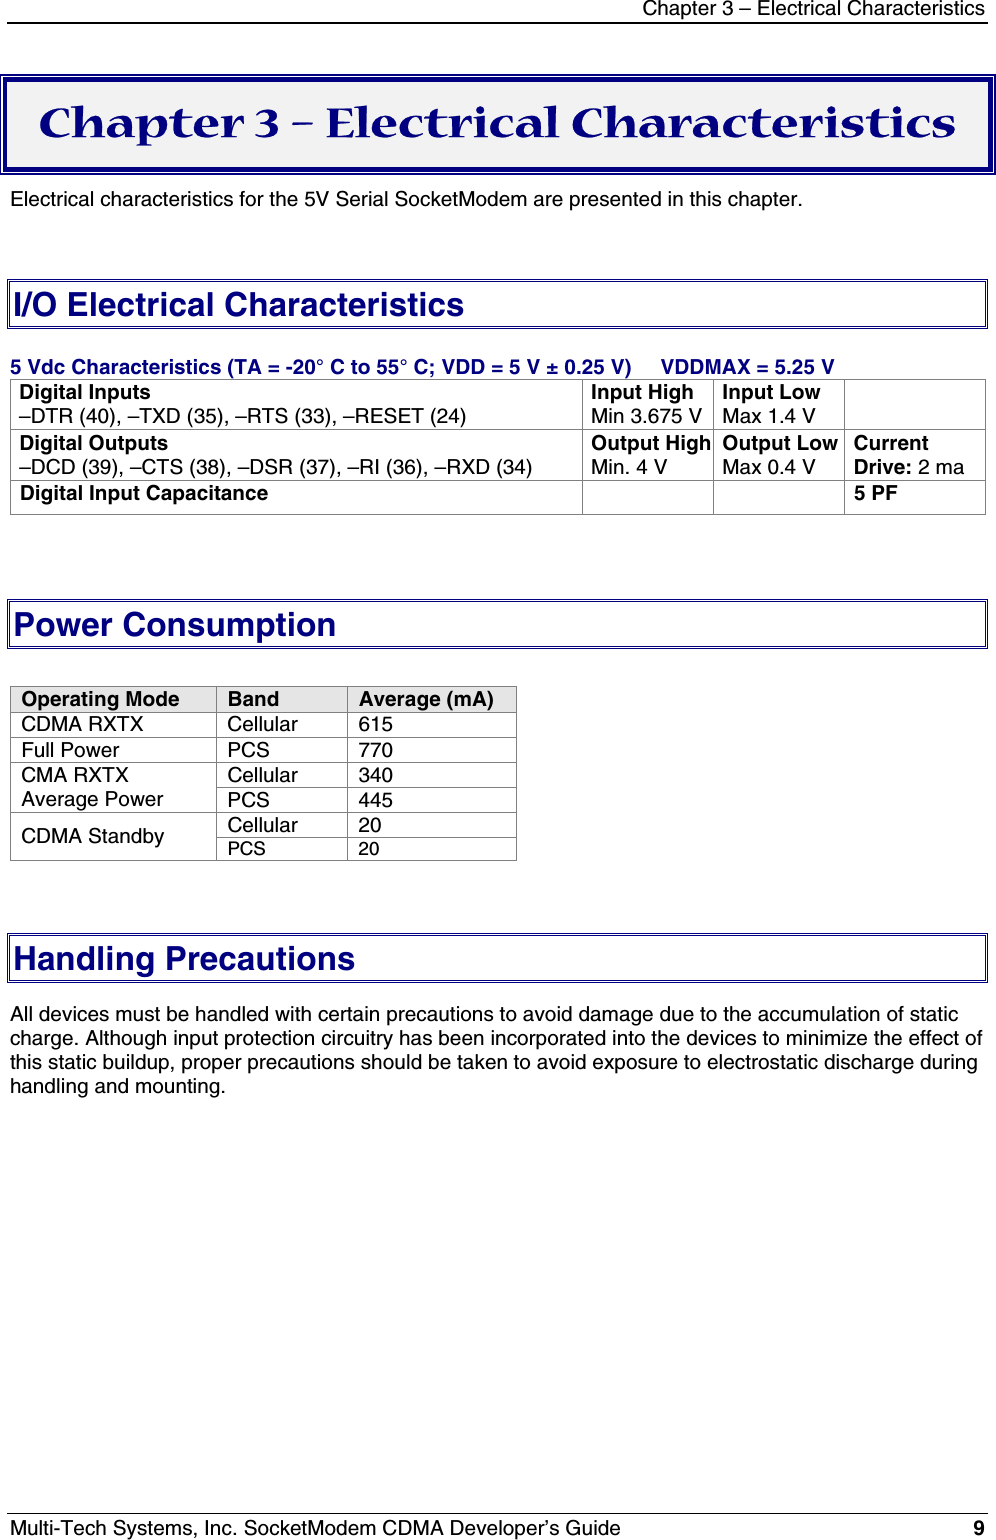 Chapter 3 – Electrical CharacteristicsMulti-Tech Systems, Inc. SocketModem CDMA Developer’s Guide 9Chapter 3 – Electrical CharacteristicsElectrical characteristics for the 5V Serial SocketModem are presented in this chapter.I/O Electrical Characteristics5 Vdc Characteristics (TA = -20° C to 55° C; VDD = 5 V ± 0.25 V)     VDDMAX = 5.25 VDigital Inputs–DTR (40), –TXD (35), –RTS (33), –RESET (24)Input HighMin 3.675 VInput LowMax 1.4 VDigital Outputs–DCD (39), –CTS (38), –DSR (37), –RI (36), –RXD (34)Output HighMin. 4 VOutput LowMax 0.4 VCurrentDrive: 2 maDigital Input Capacitance 5 PFPower ConsumptionOperating Mode Band Average (mA)CDMA RXTX Cellular 615Full Power PCS 770Cellular 340CMA RXTXAverage Power PCS 445Cellular 20CDMA Standby PCS 20Handling PrecautionsAll devices must be handled with certain precautions to avoid damage due to the accumulation of staticcharge. Although input protection circuitry has been incorporated into the devices to minimize the effect ofthis static buildup, proper precautions should be taken to avoid exposure to electrostatic discharge duringhandling and mounting.